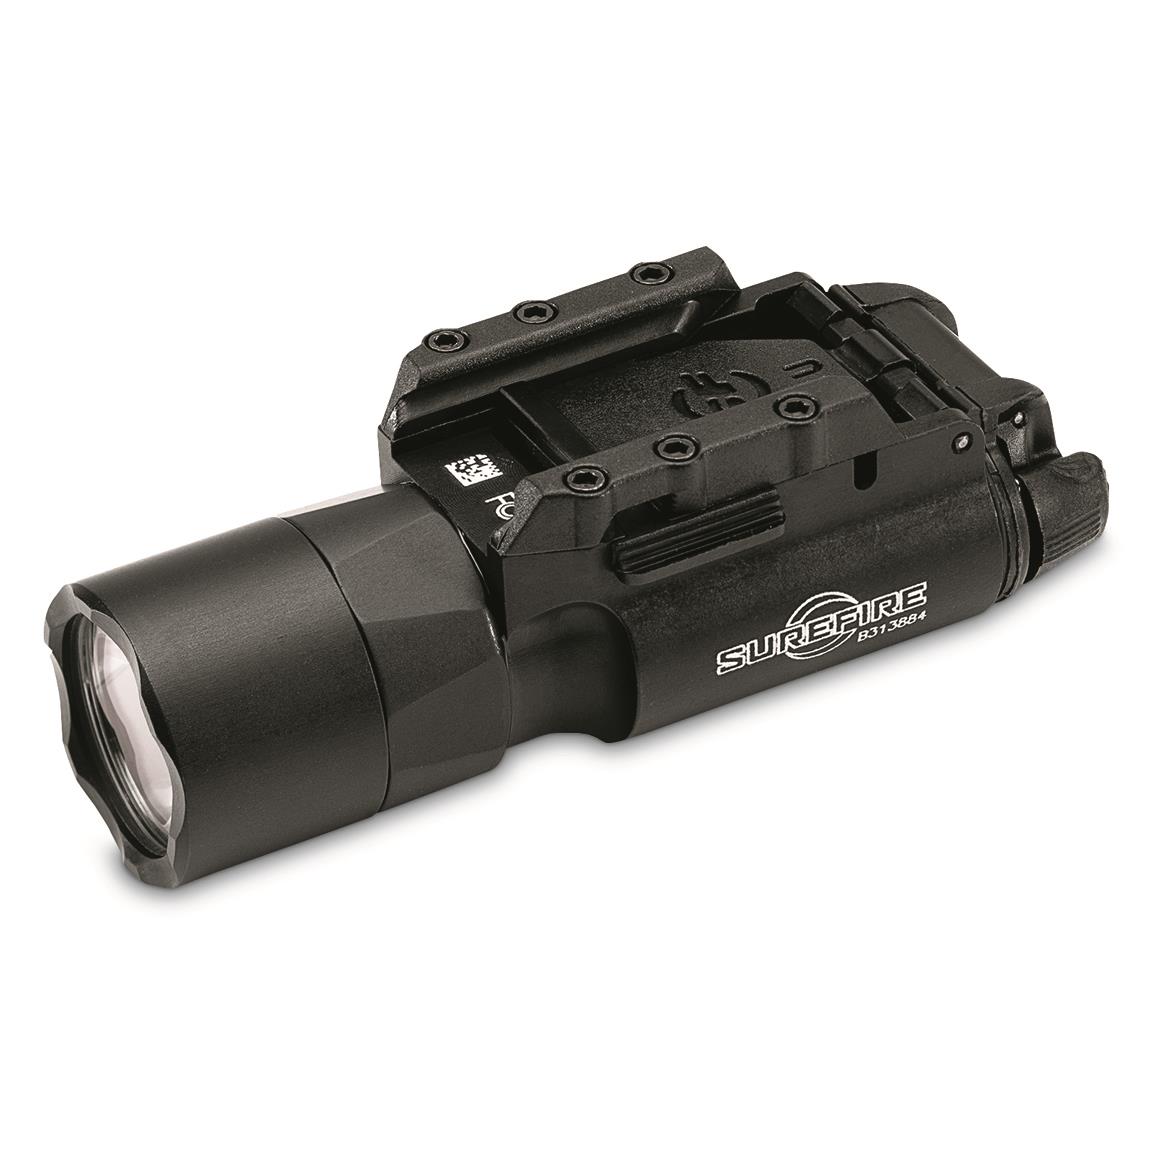 SureFire X300 Ultra Tactical Weapon Light with Rail-Lock Mounting System